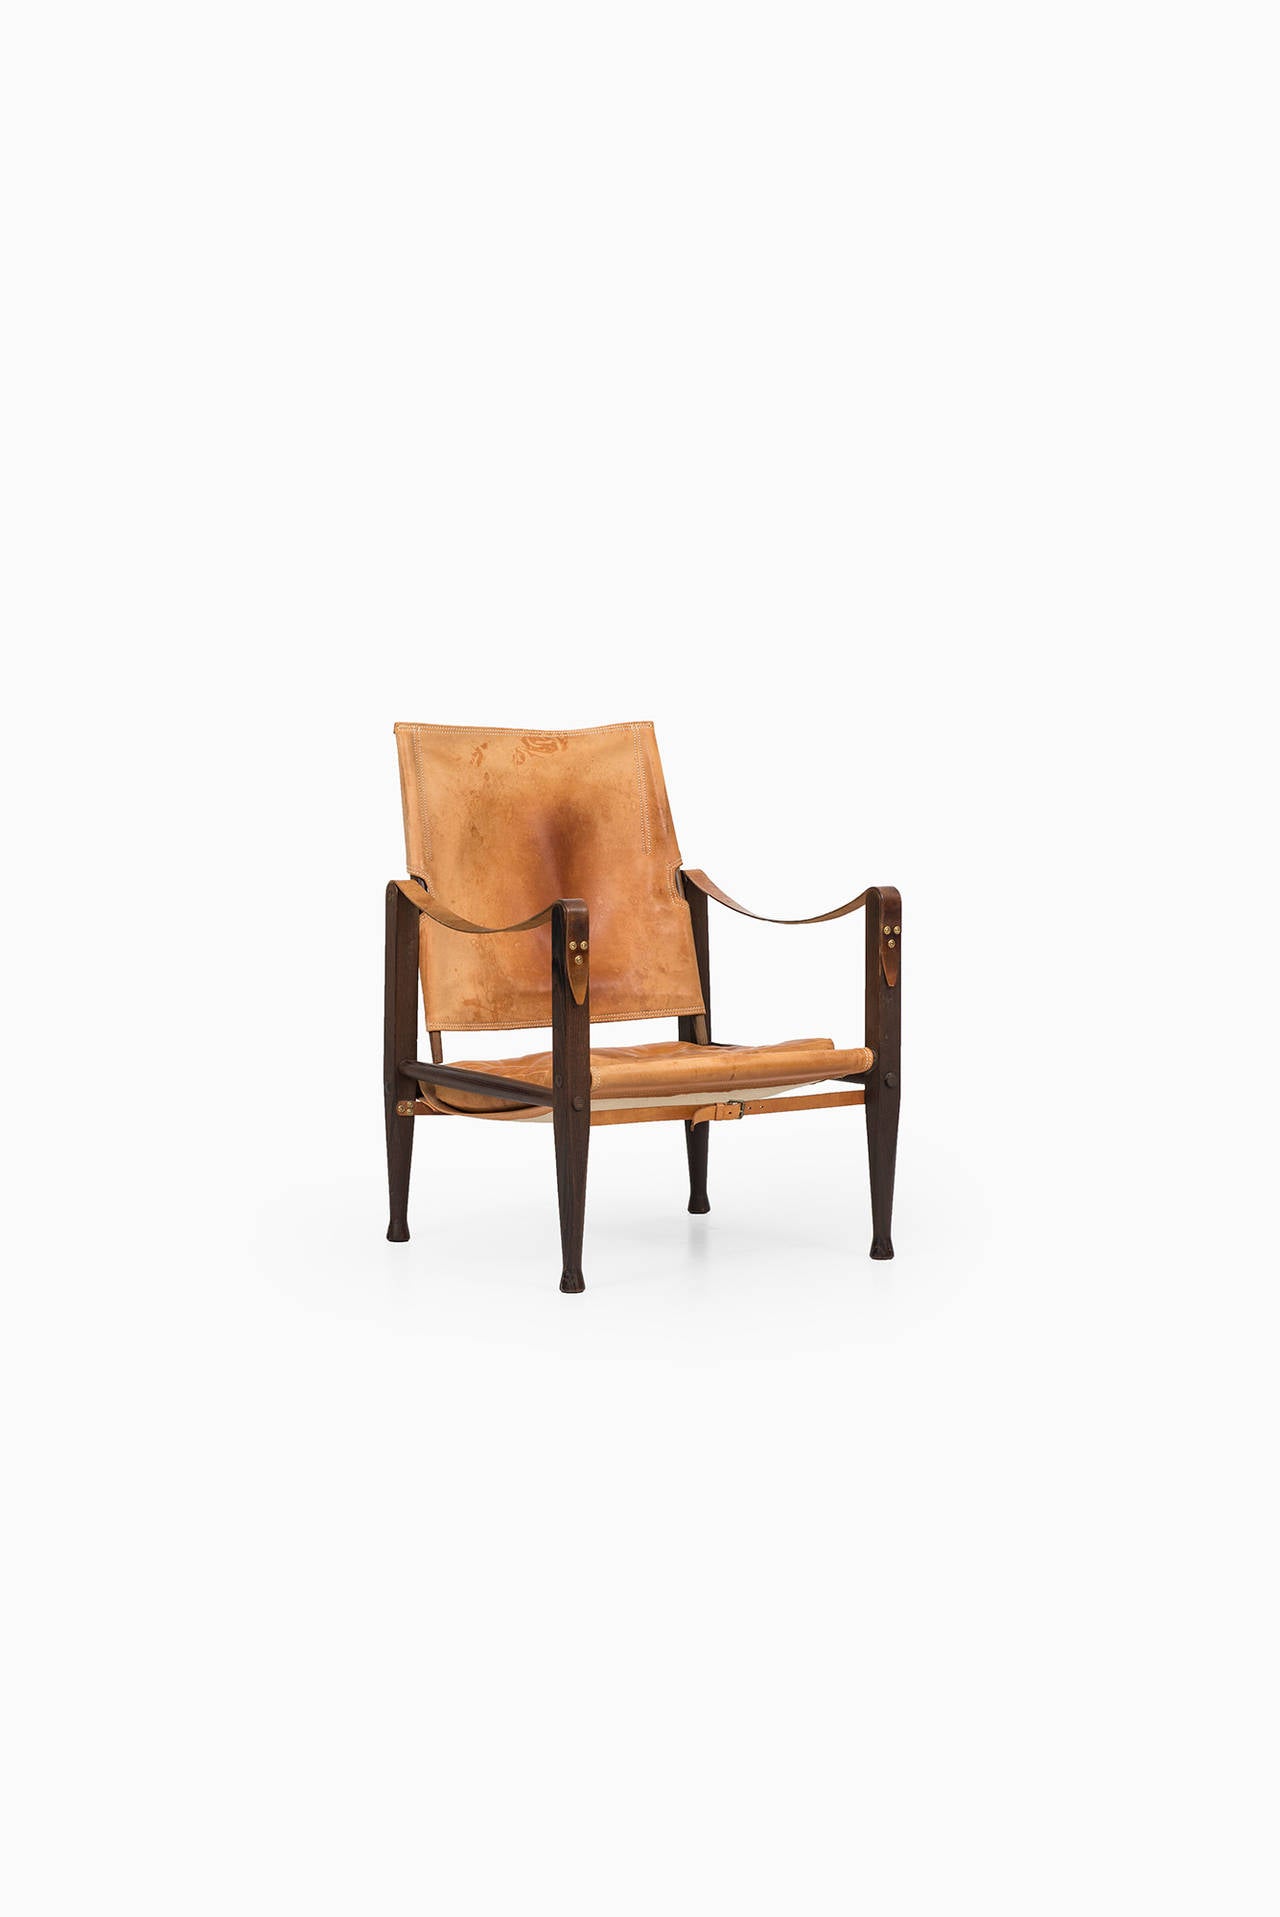 Safari chair in dark stained ash and cognac brown leather designed by Kaare Klint. Produced by Rud. Rasmussen in Denmark.